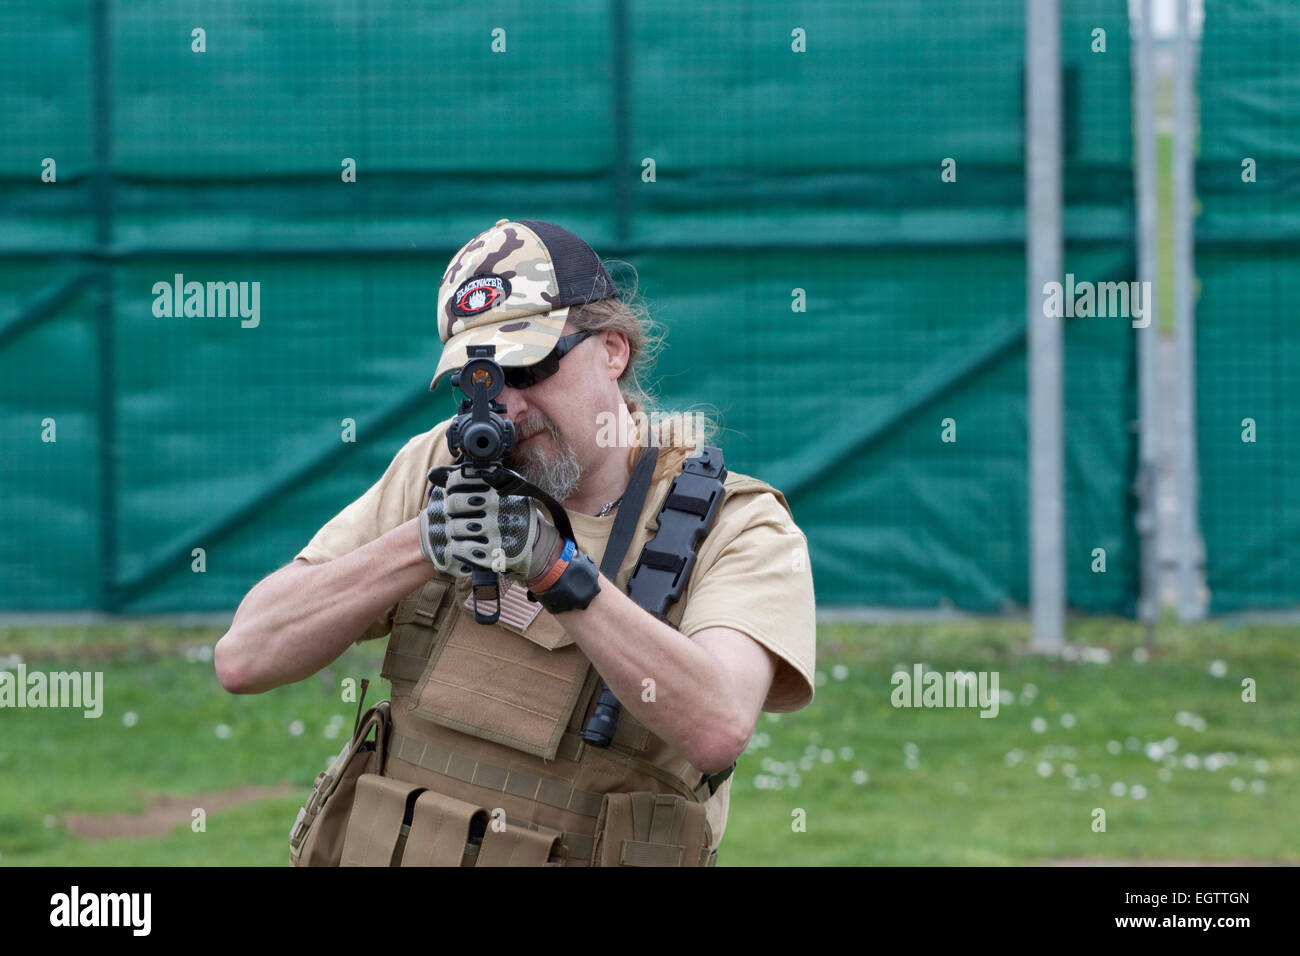 Reenactor in the military style uniform  of a private security firm points a reproduction firearm at the camera Stock Photo